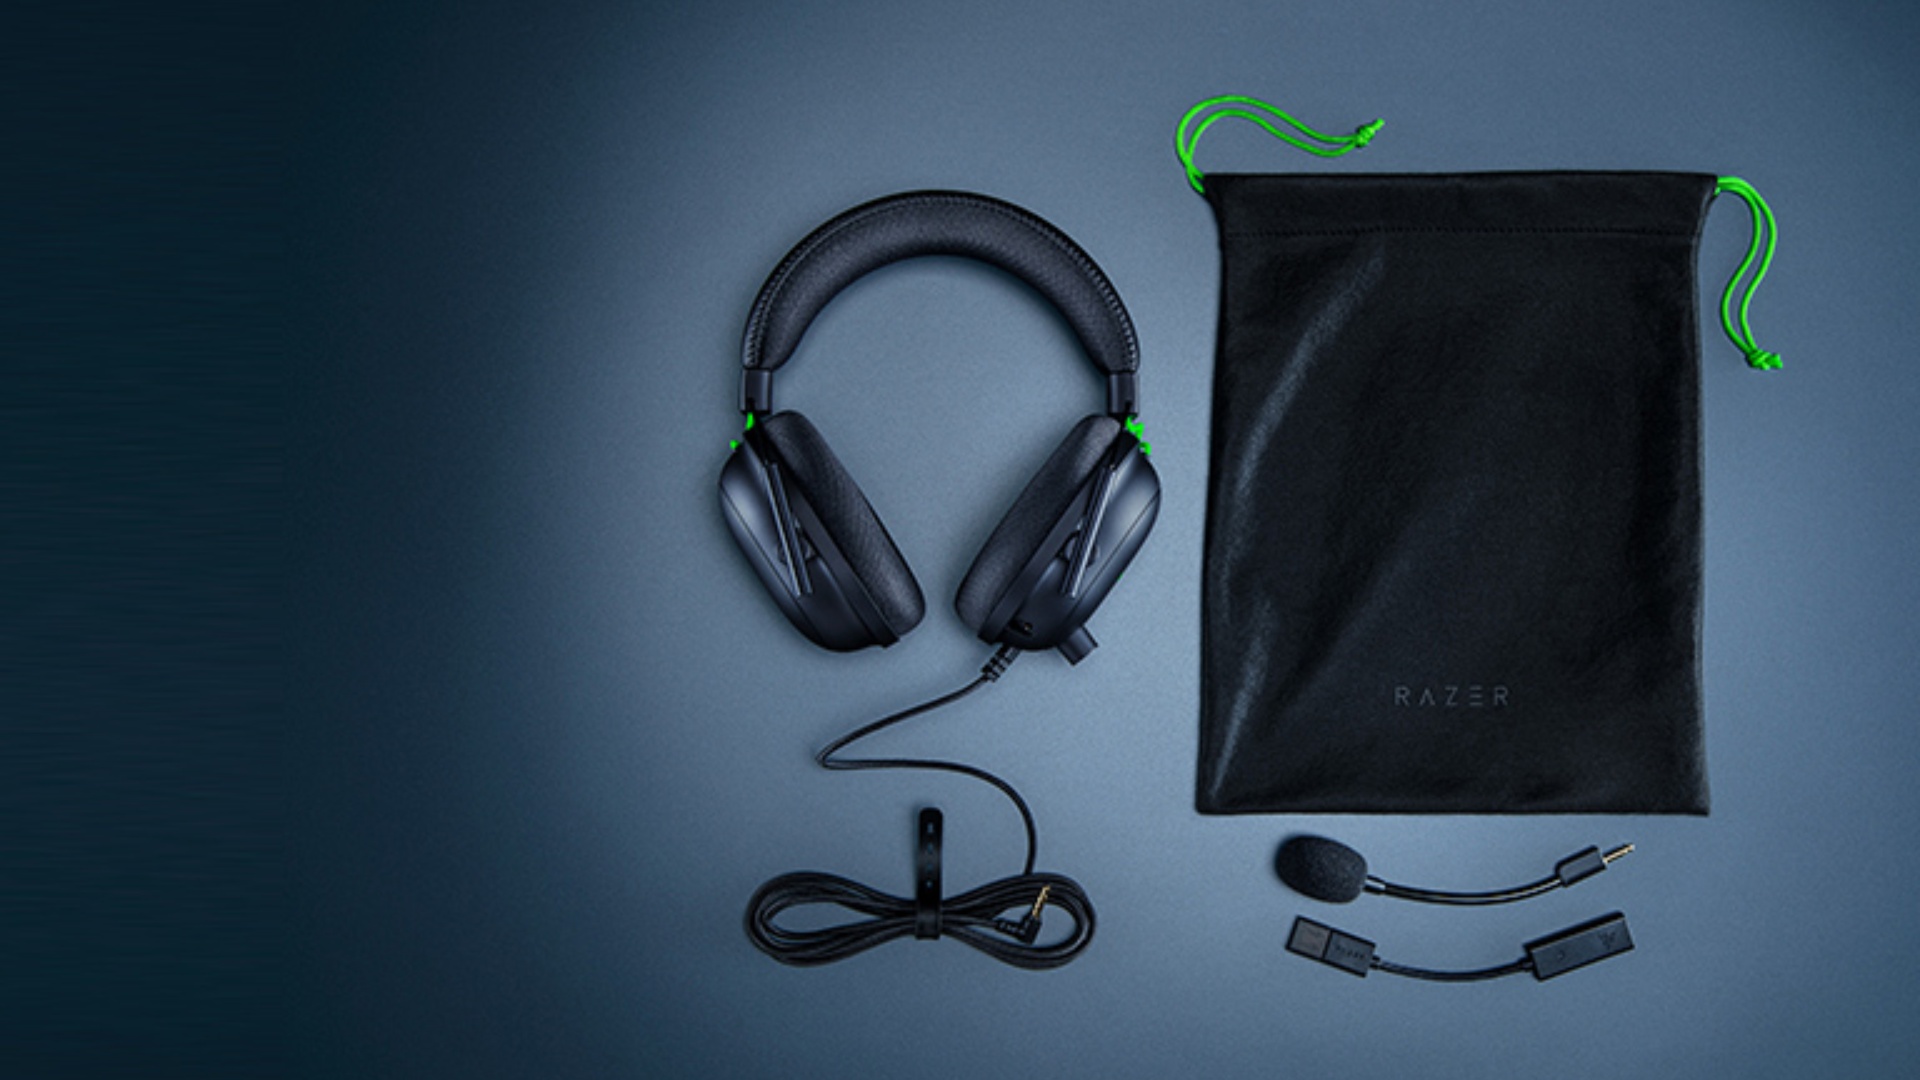 The Razer Kraken Gaming Headset is Available at a 38% Discount